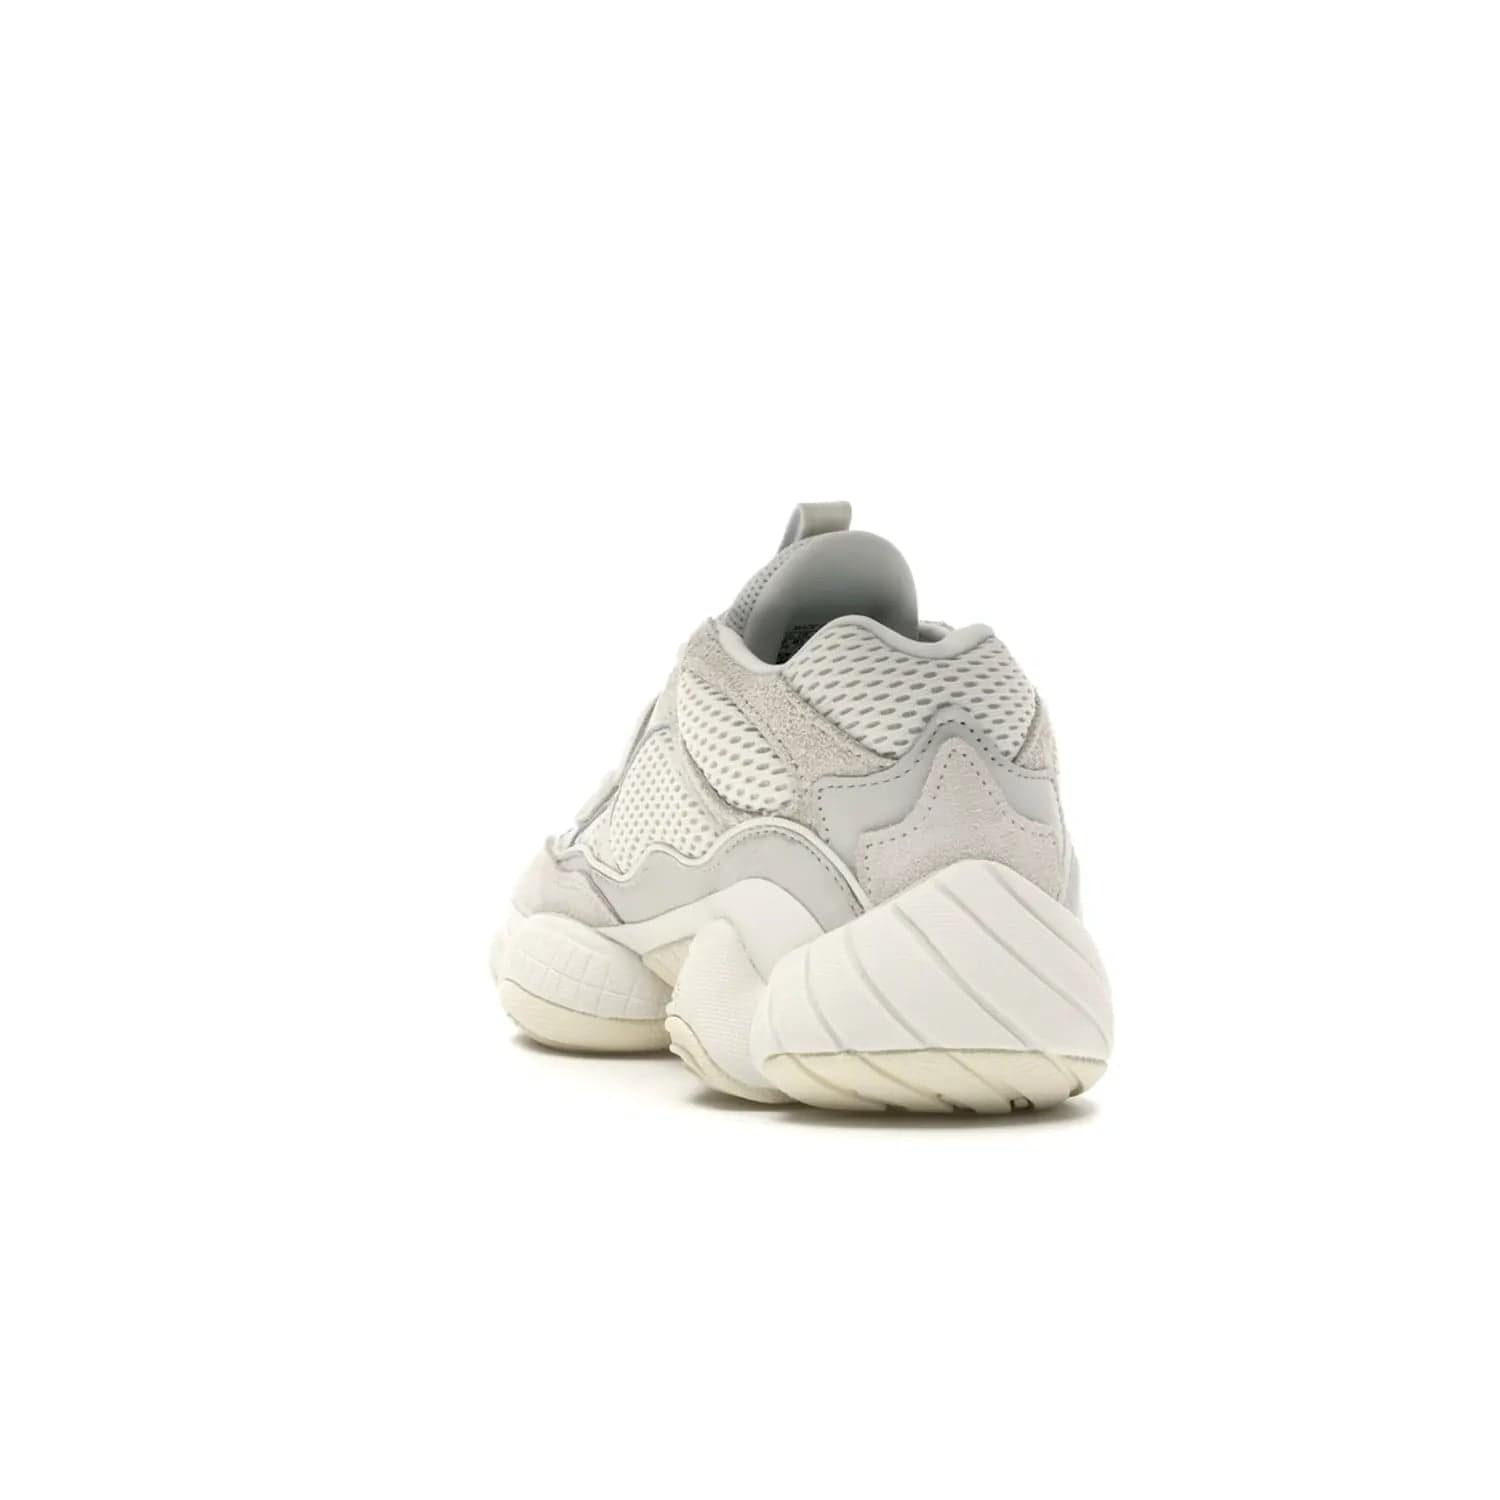 adidas Yeezy 500 Bone White - Image 26 - Only at www.BallersClubKickz.com - Classic look perfect for any sneaker collection. The adidas Yeezy 500 "Bone White" blends a white mesh upper with suede overlays & a chunky midsole inspired by the Adidas KB3. Complimented by a tonal-cream outsole, this timeless style is a must-have.